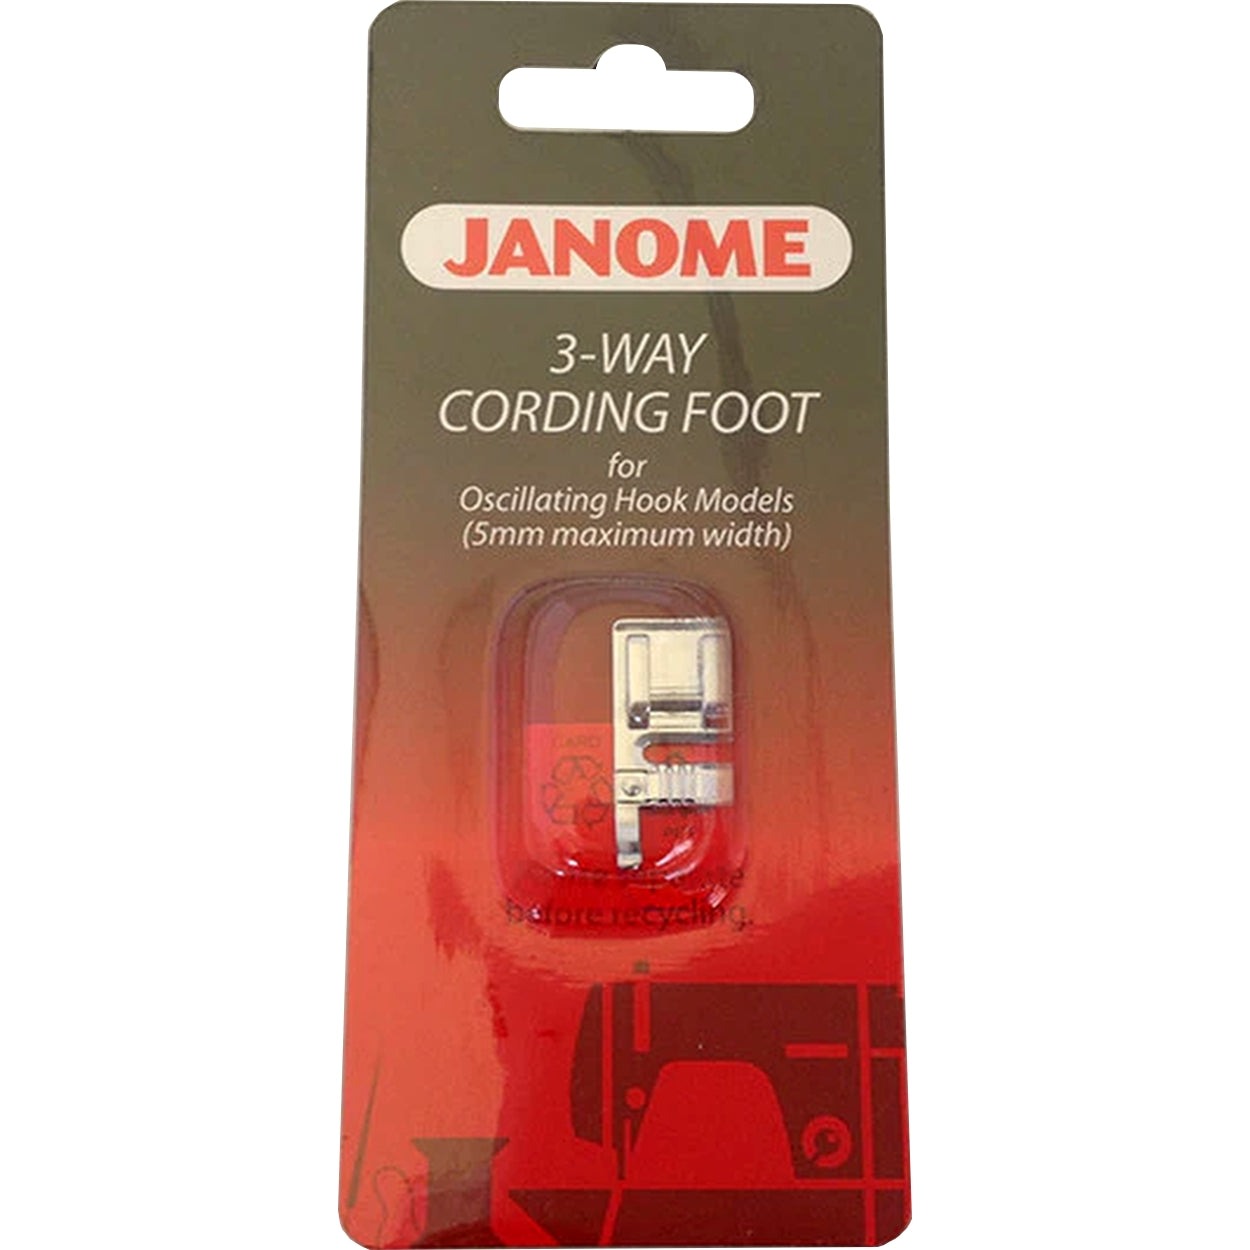 3 way cording foot - Front load Janome from Jaycotts Sewing Supplies